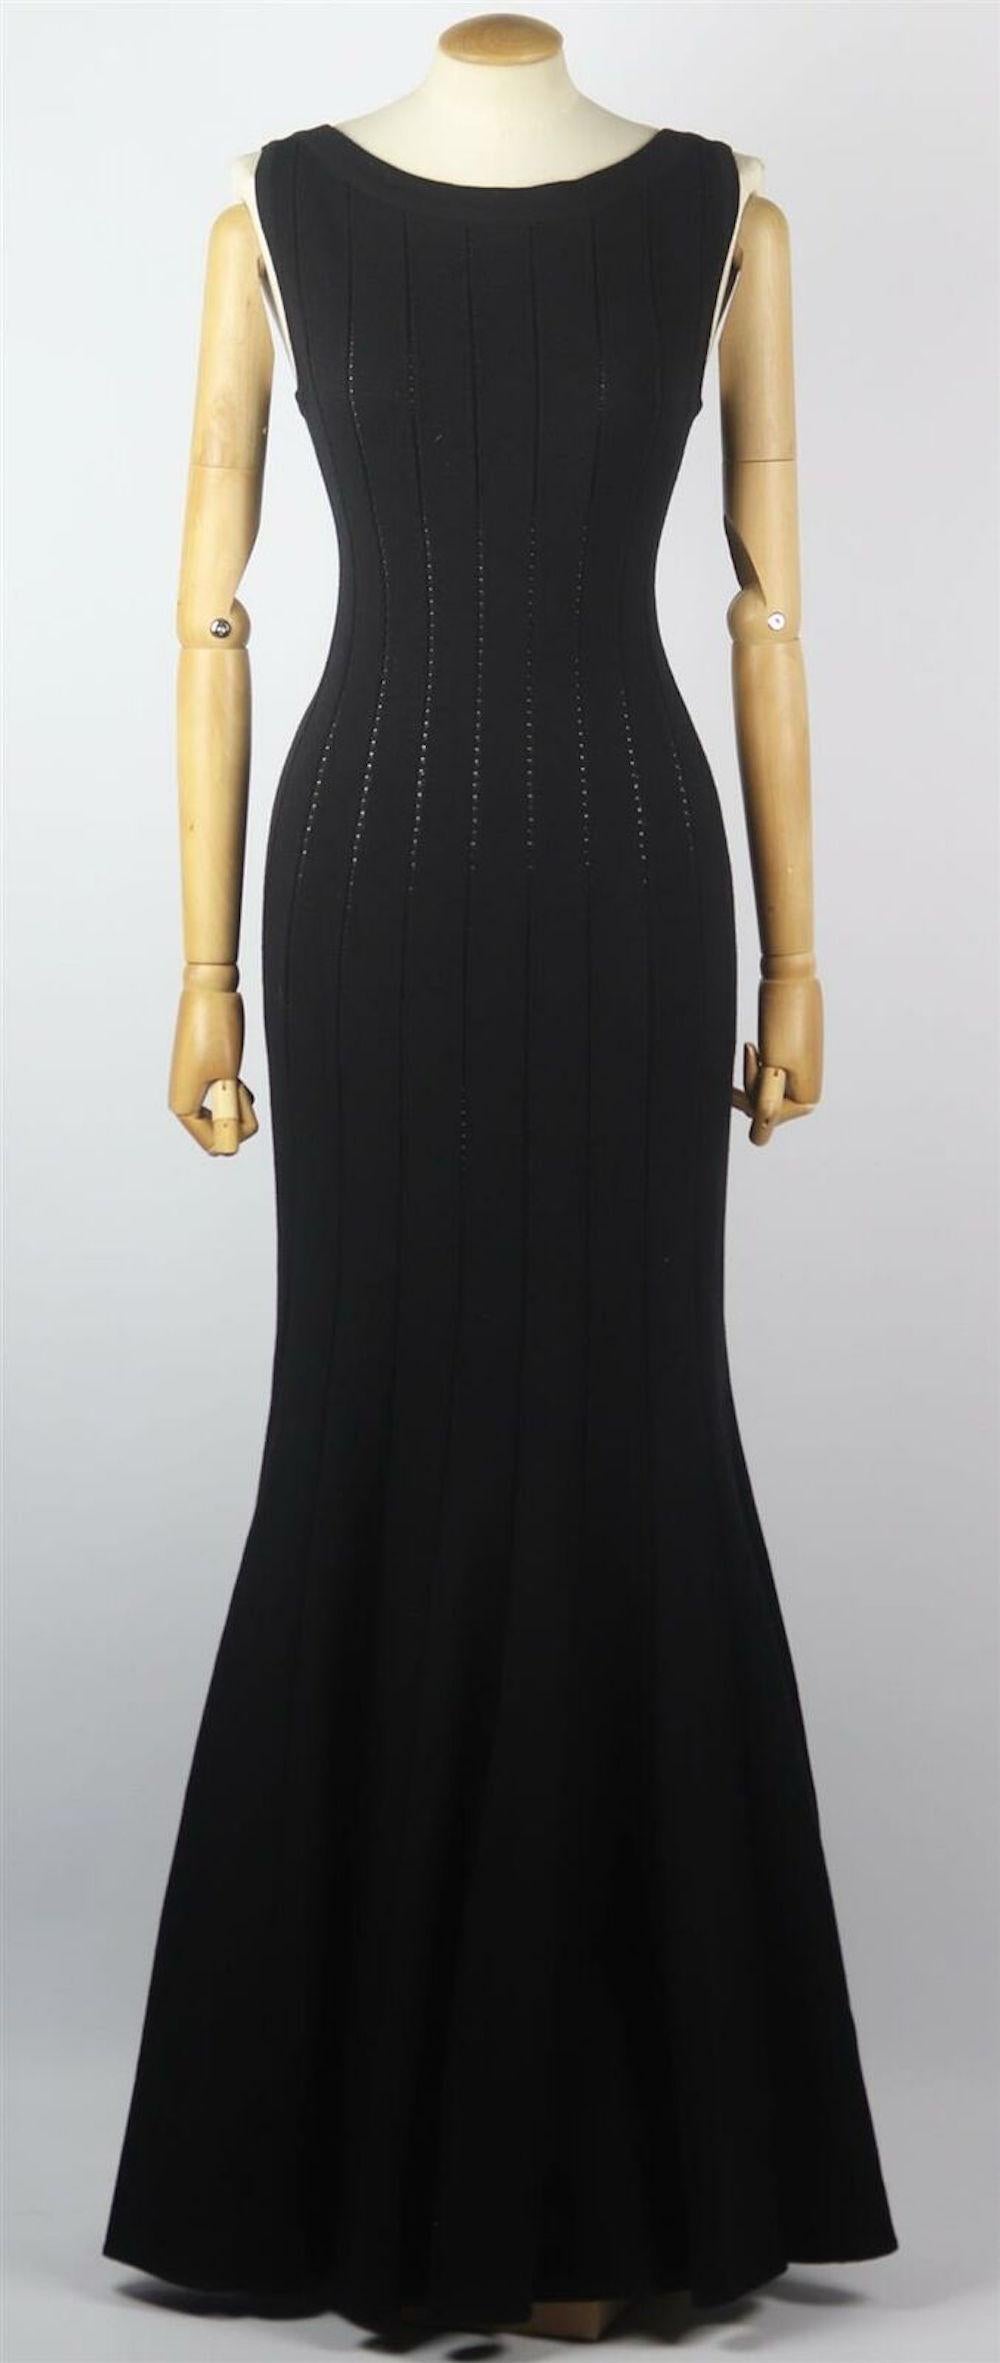 This maxi dress by Azzedine Alaïa is knitted from stretchy ribbed wool-blend that holds the shape and volume of the pleats beautifully and nips in perfectly at the waist for an elongated silhouette.
Black wool-blend.
Concealed zip fastening at